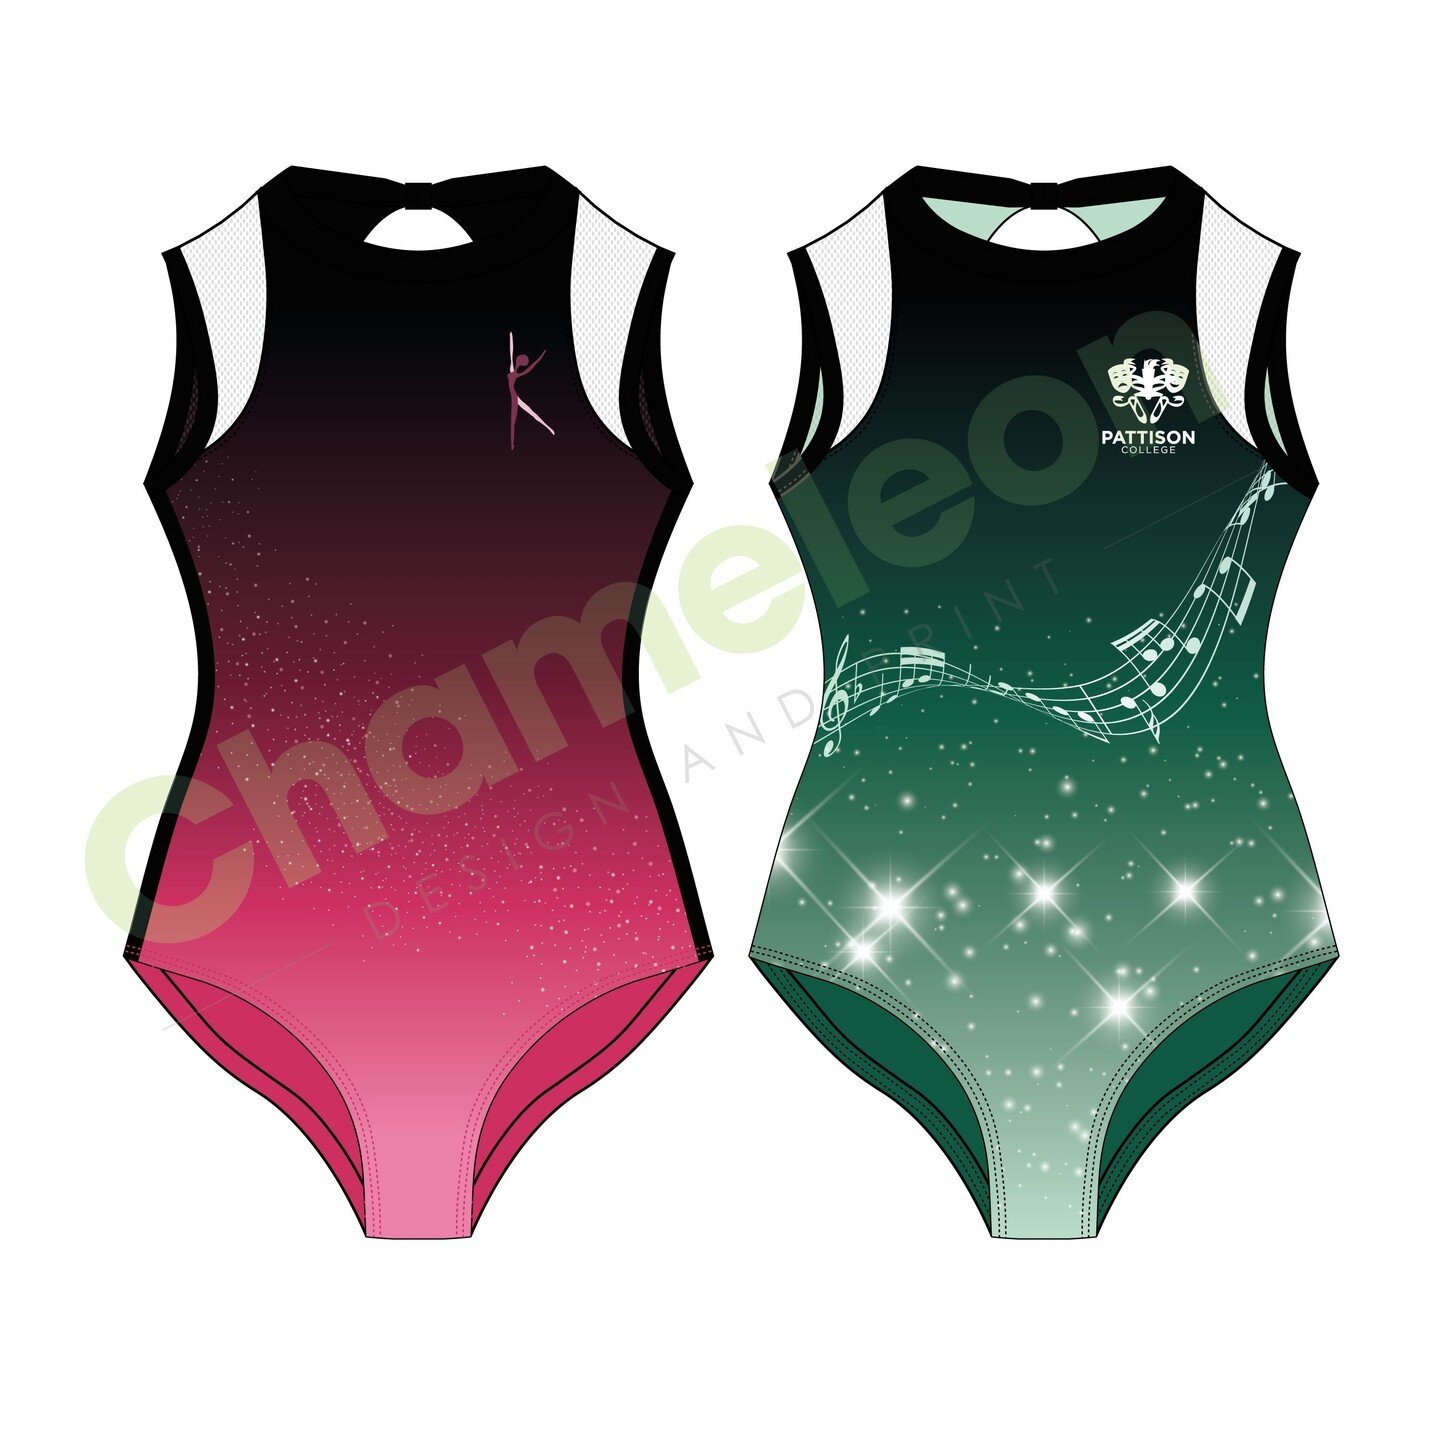 Our Elite High Neck leotards have been super popular recently! 💫 Available in adult sizes only with mesh shoulders and a key hole back. The perfect leotard for your senior classes or competitions! 

Speak to one of our friendly team at Chameleon thi